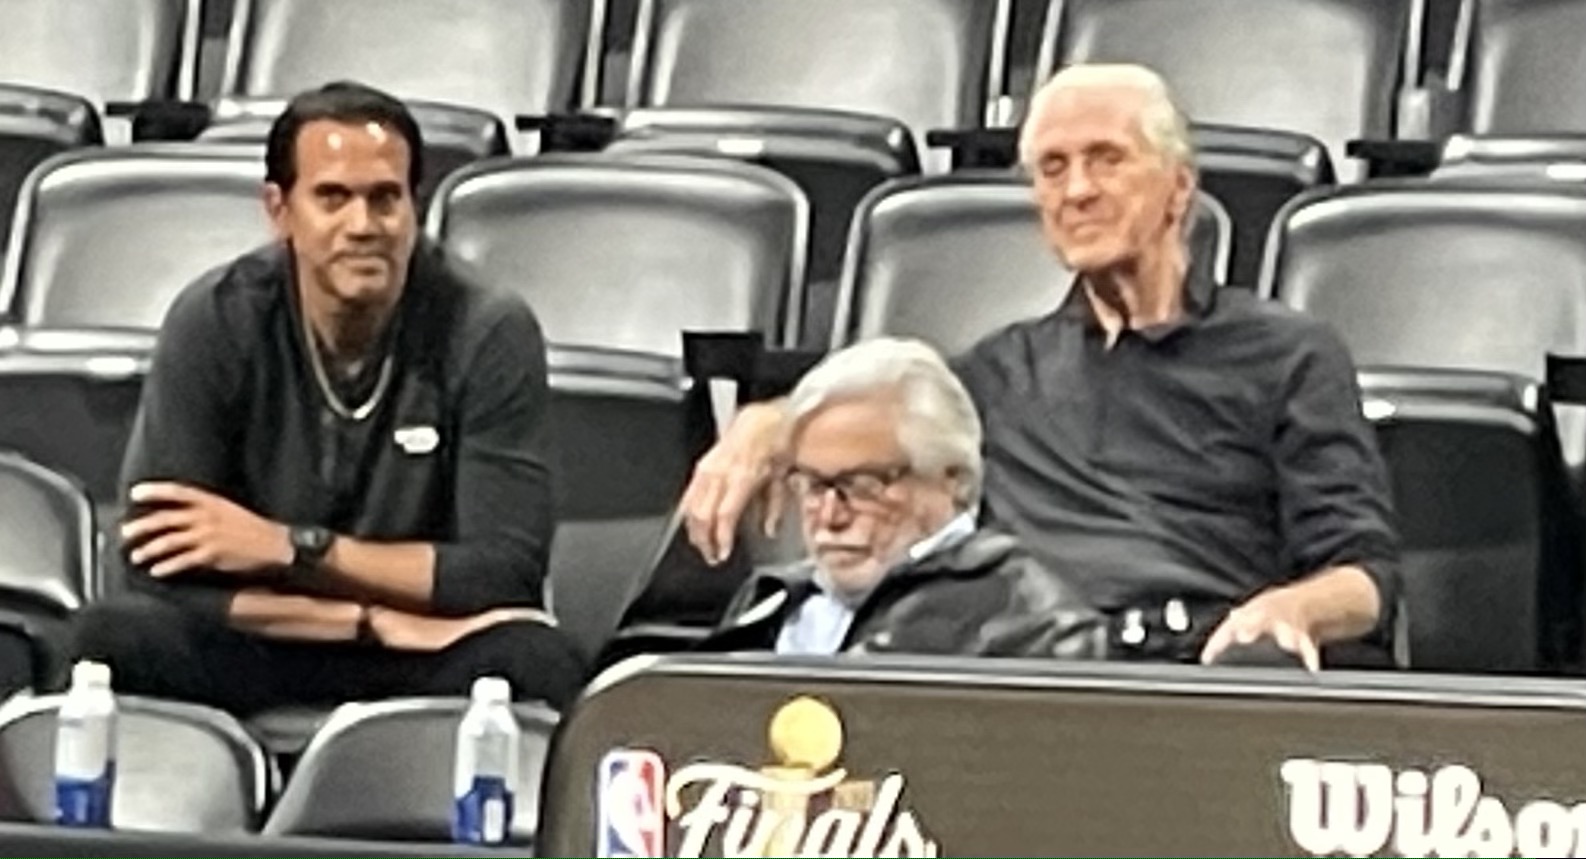 The Pat Riley series, part 3: No end in sight